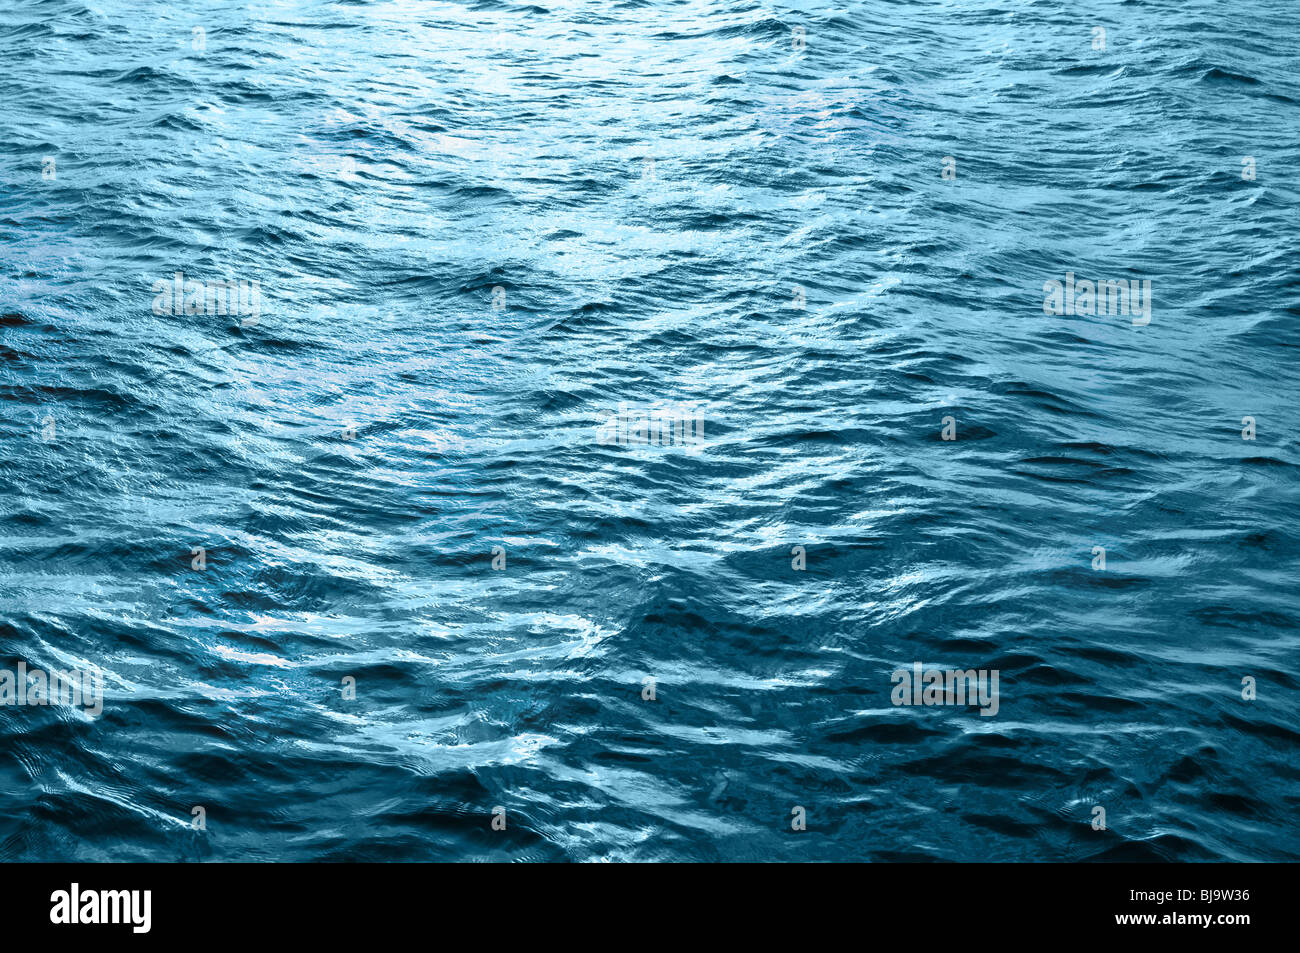 Sea water surface with ripple and cloud reflections Stock Photo